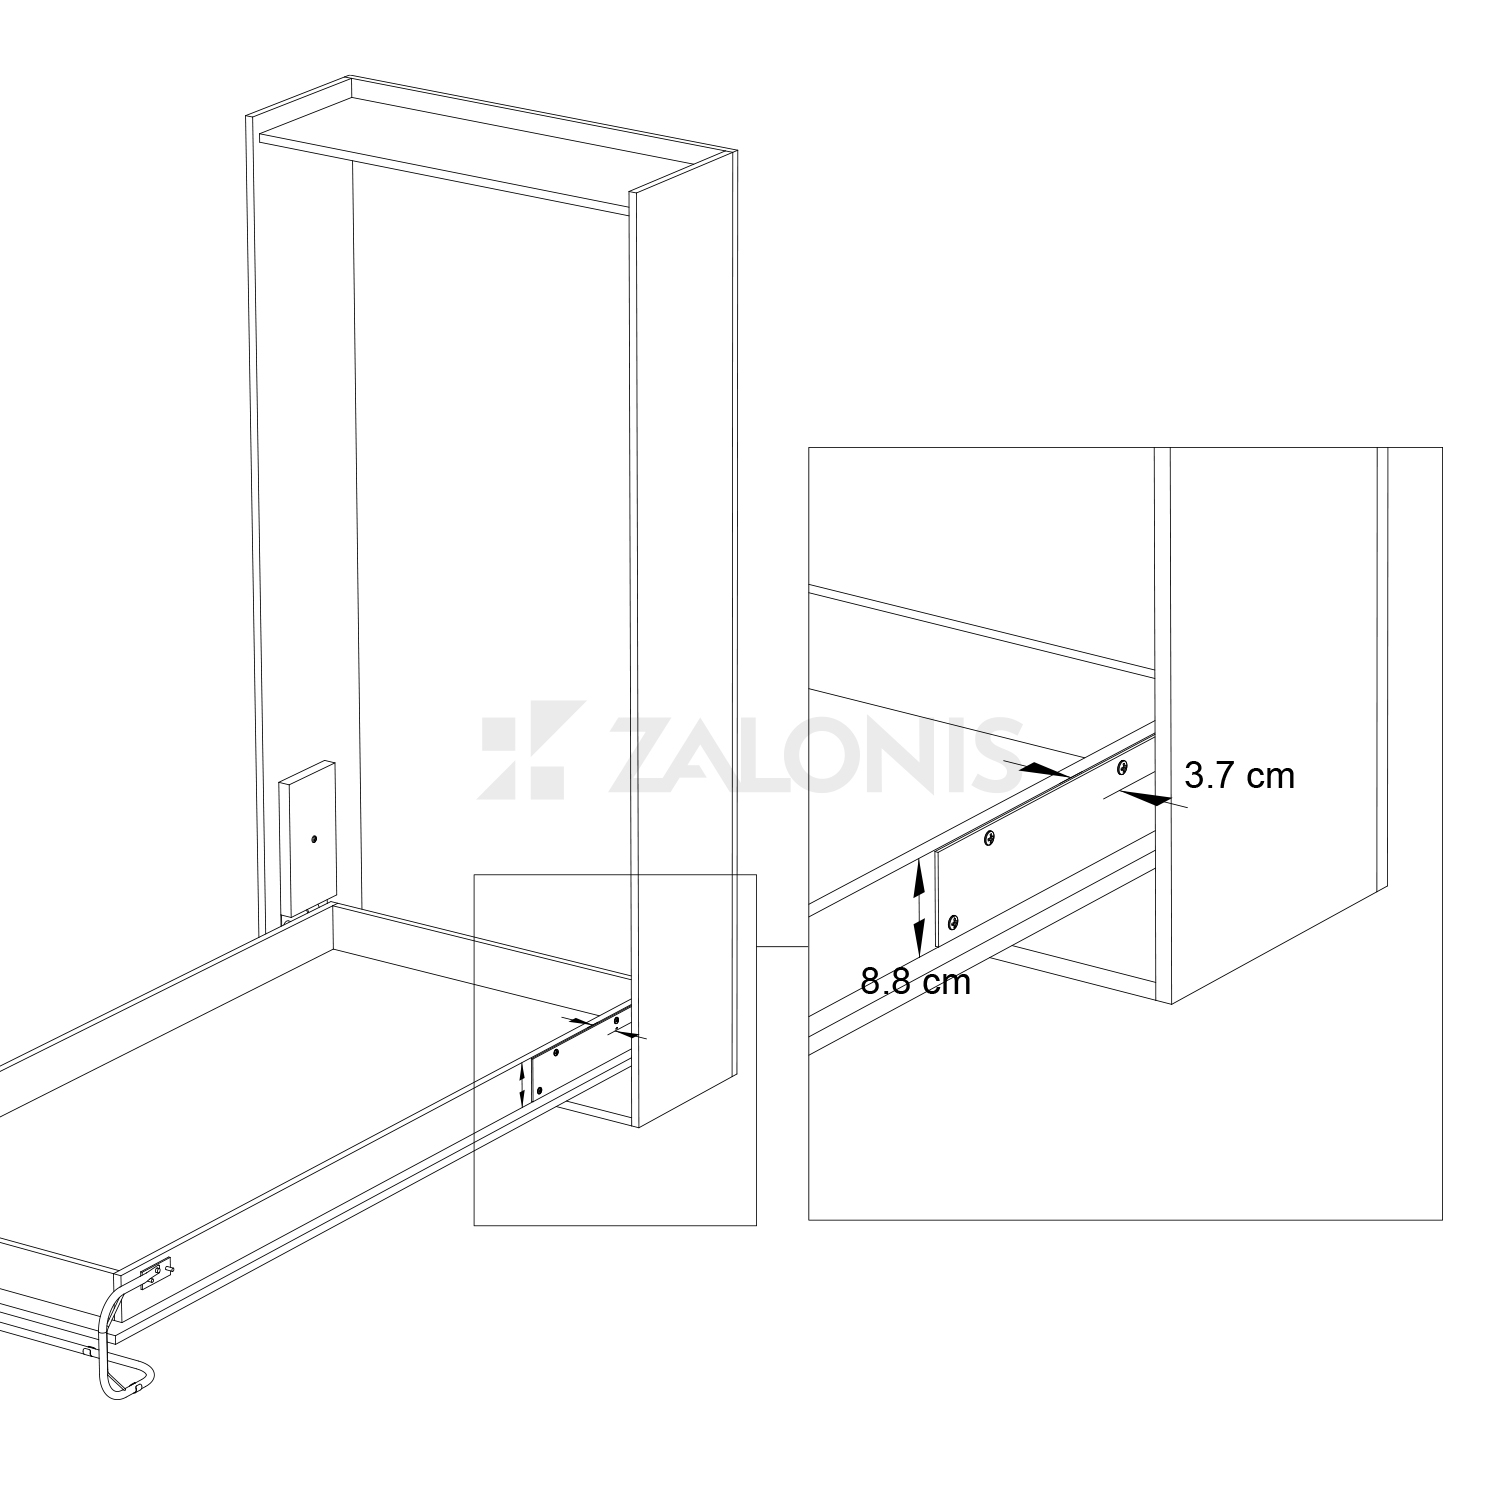 VERTICAL SINGLE WALL BED - MECHANISM AND LEG